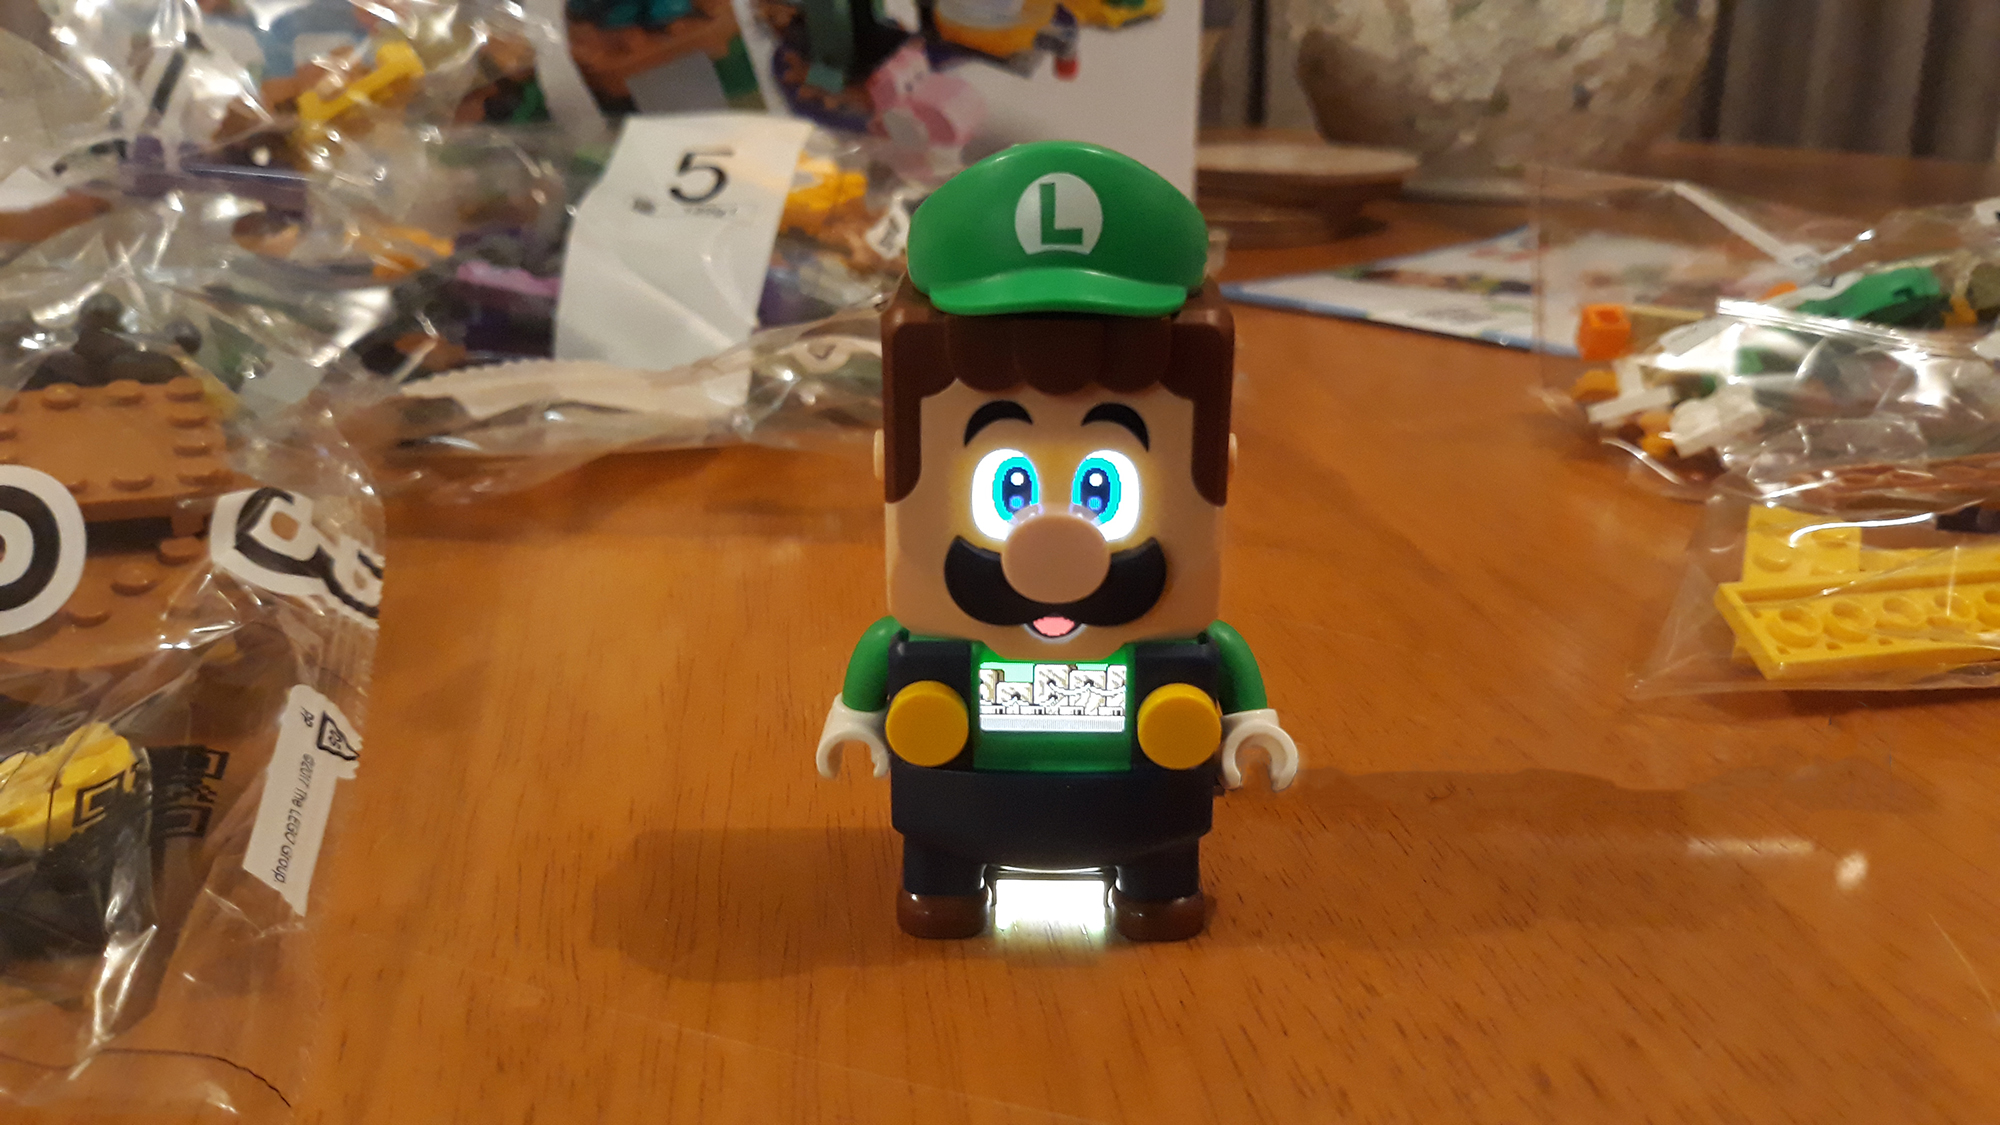 Adding Luigi and multiplayer, Lego Mario finally feels like it's reaching  its true potential